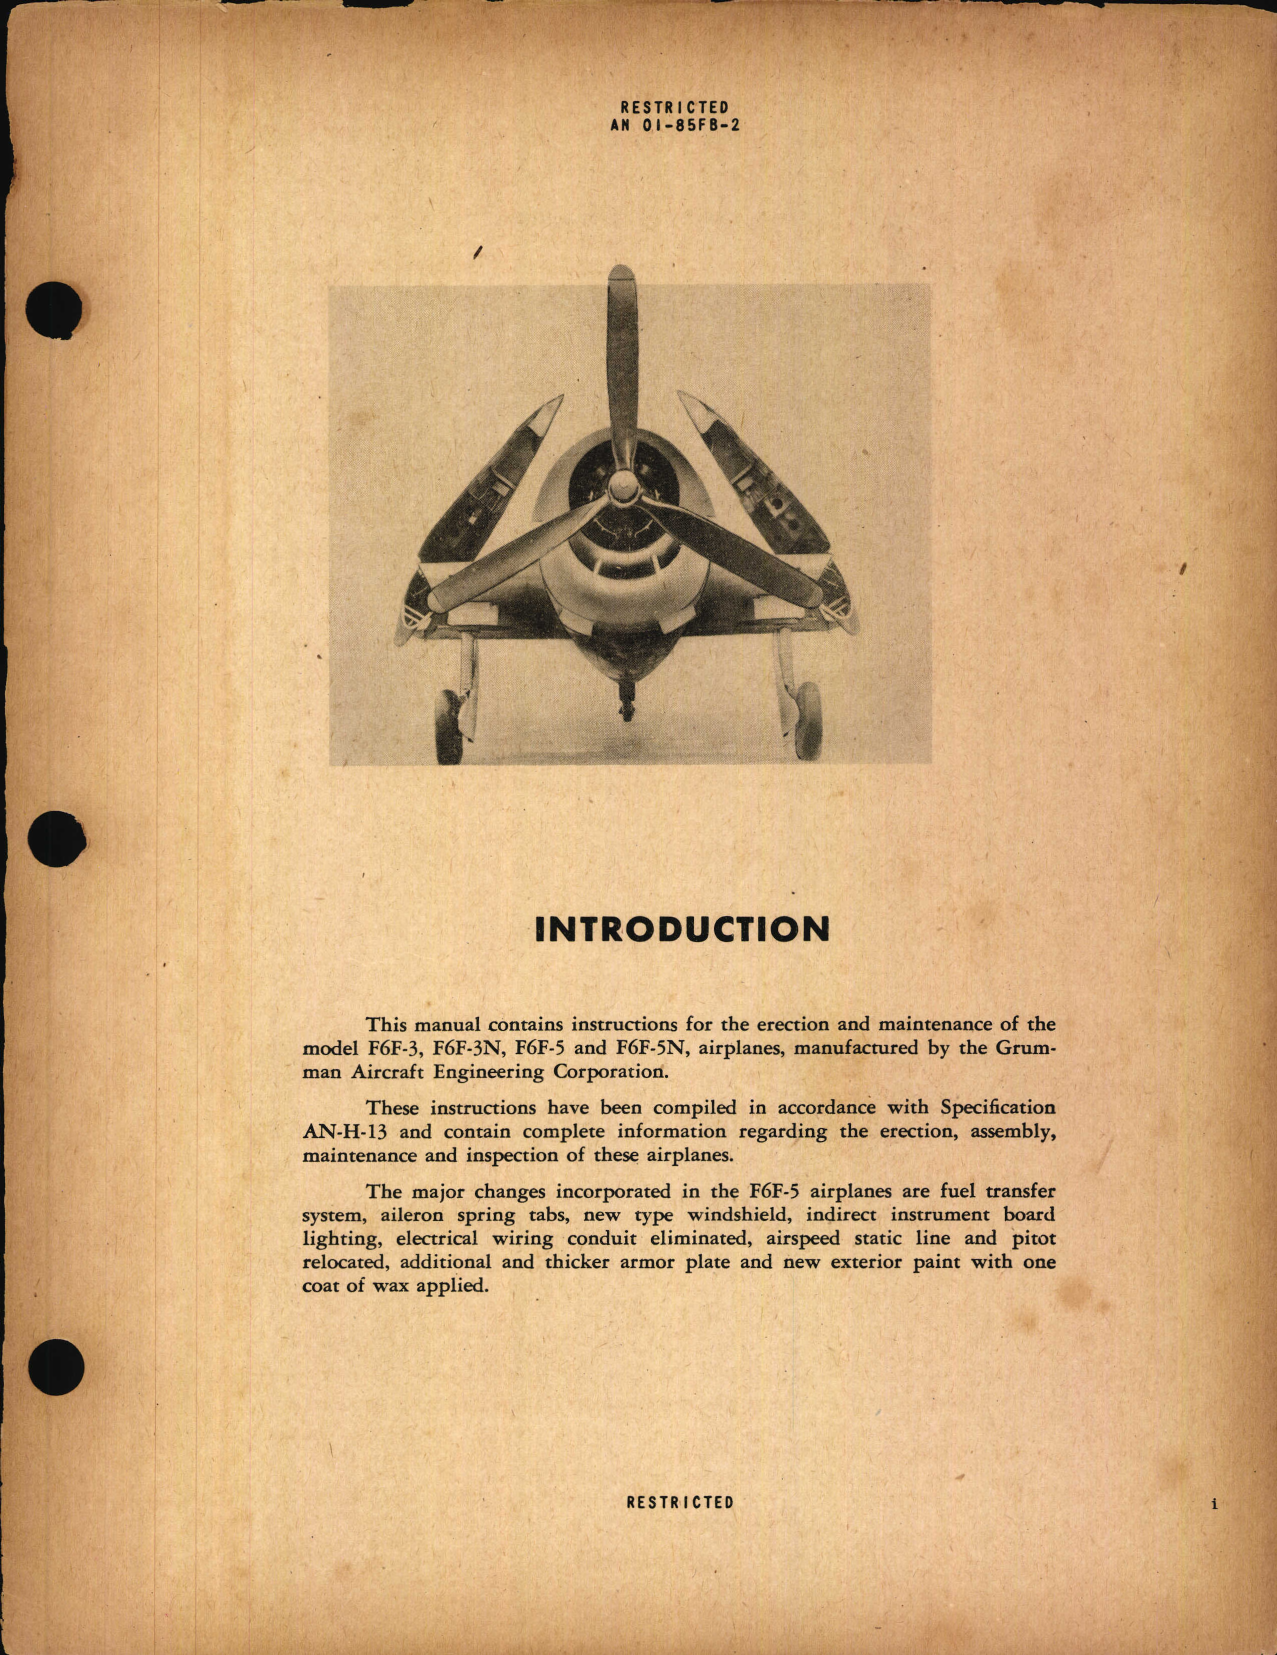 Sample page 5 from AirCorps Library document: Erection and Maintenance for F6F-3, F6F-3N, F6F-5, and F6F-5N 